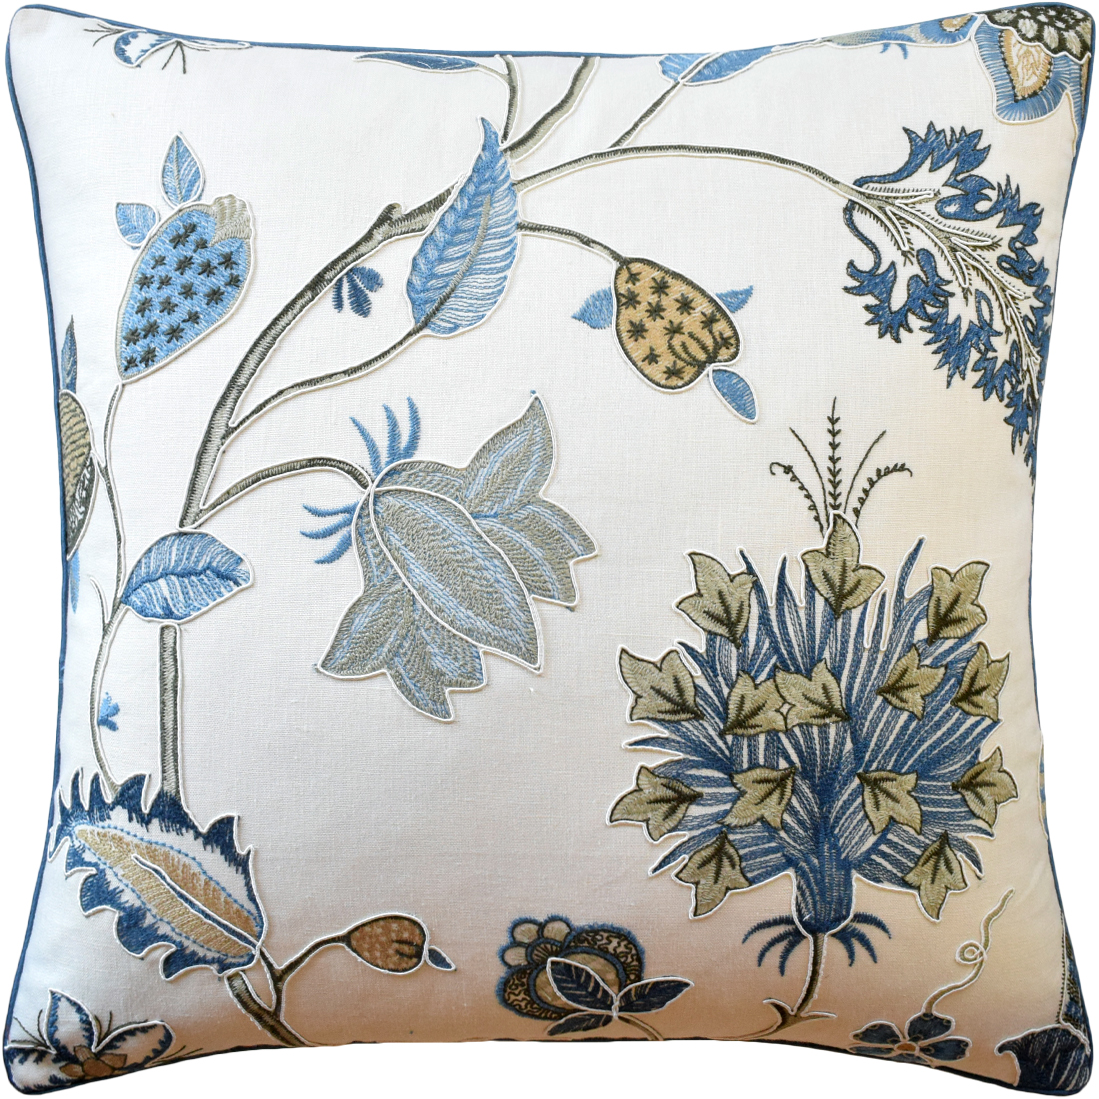 The Bakers Idienne Printed Pillow is a square, off-white contemporary accent pillow with large, soft blue wildflowers arranged throughout. Find your contemporary home decor in Charleston at GDC.